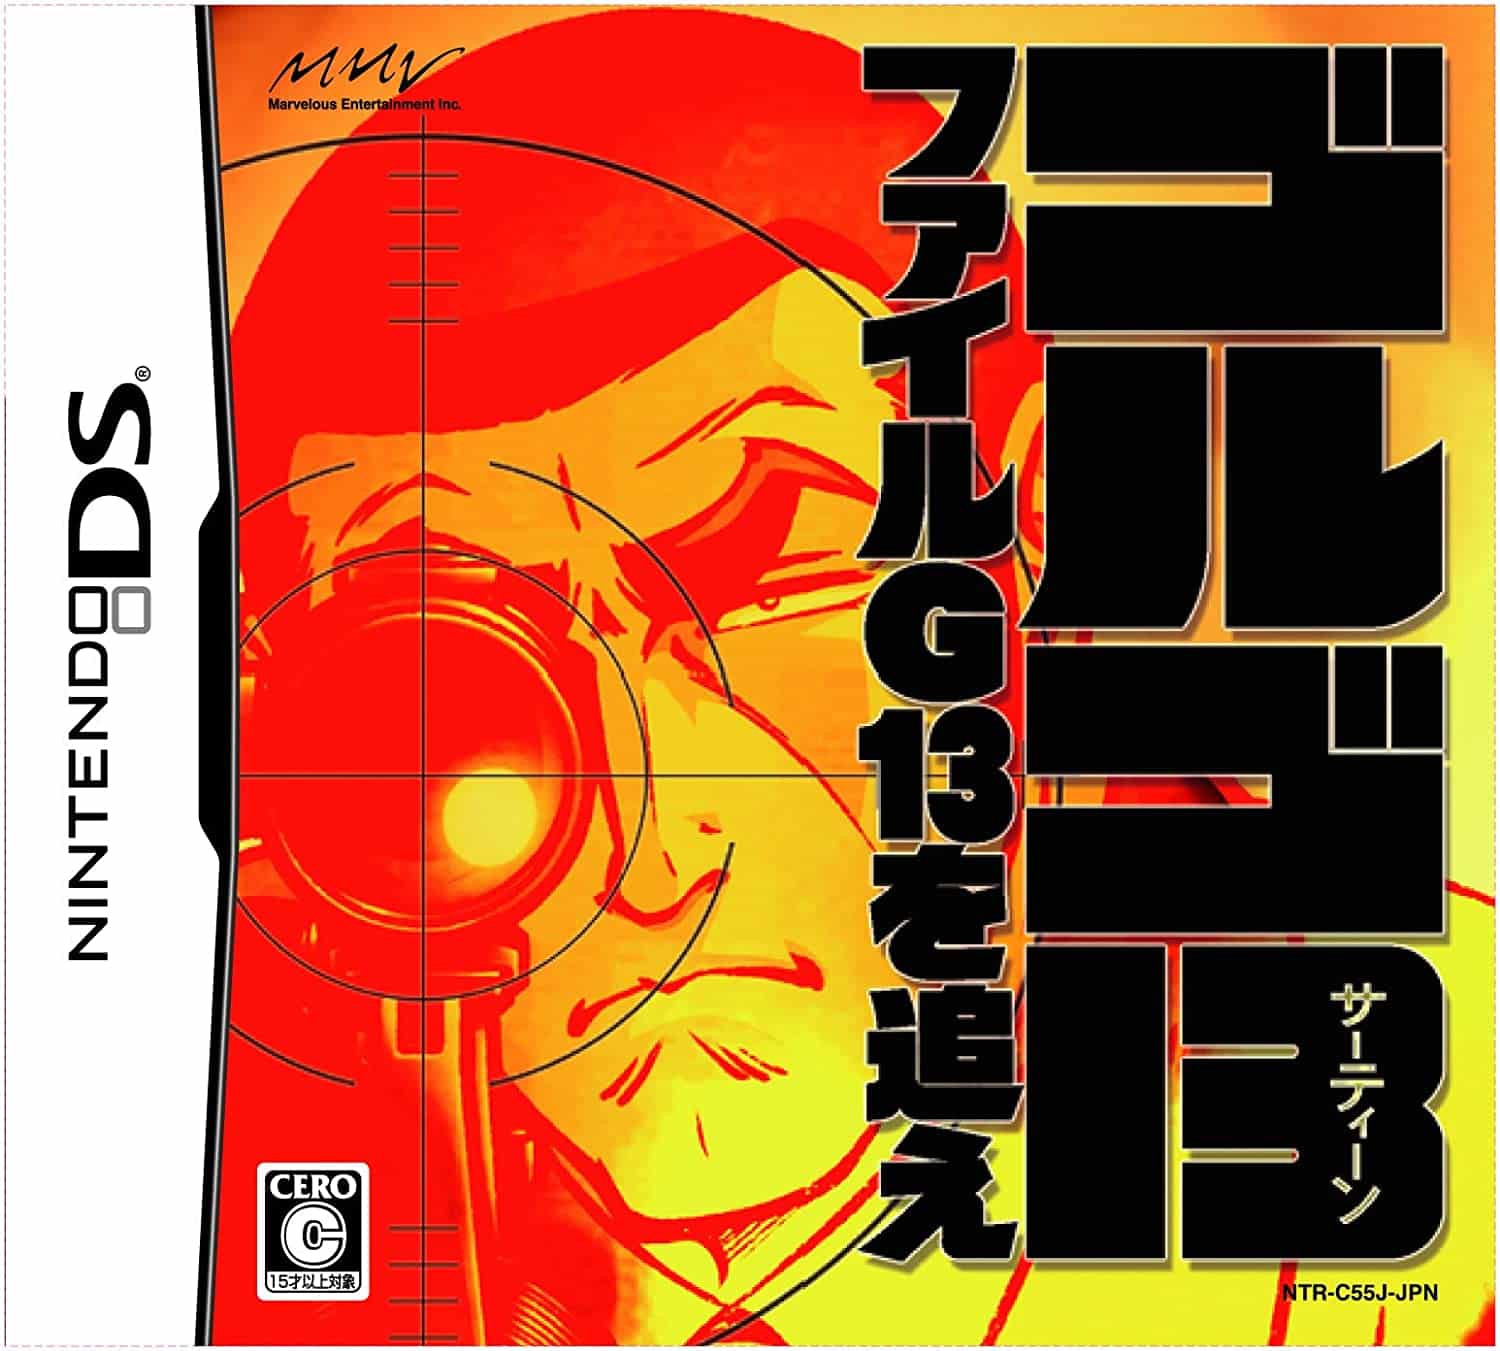 Golgo 13: File G-13 o Oe player count stats